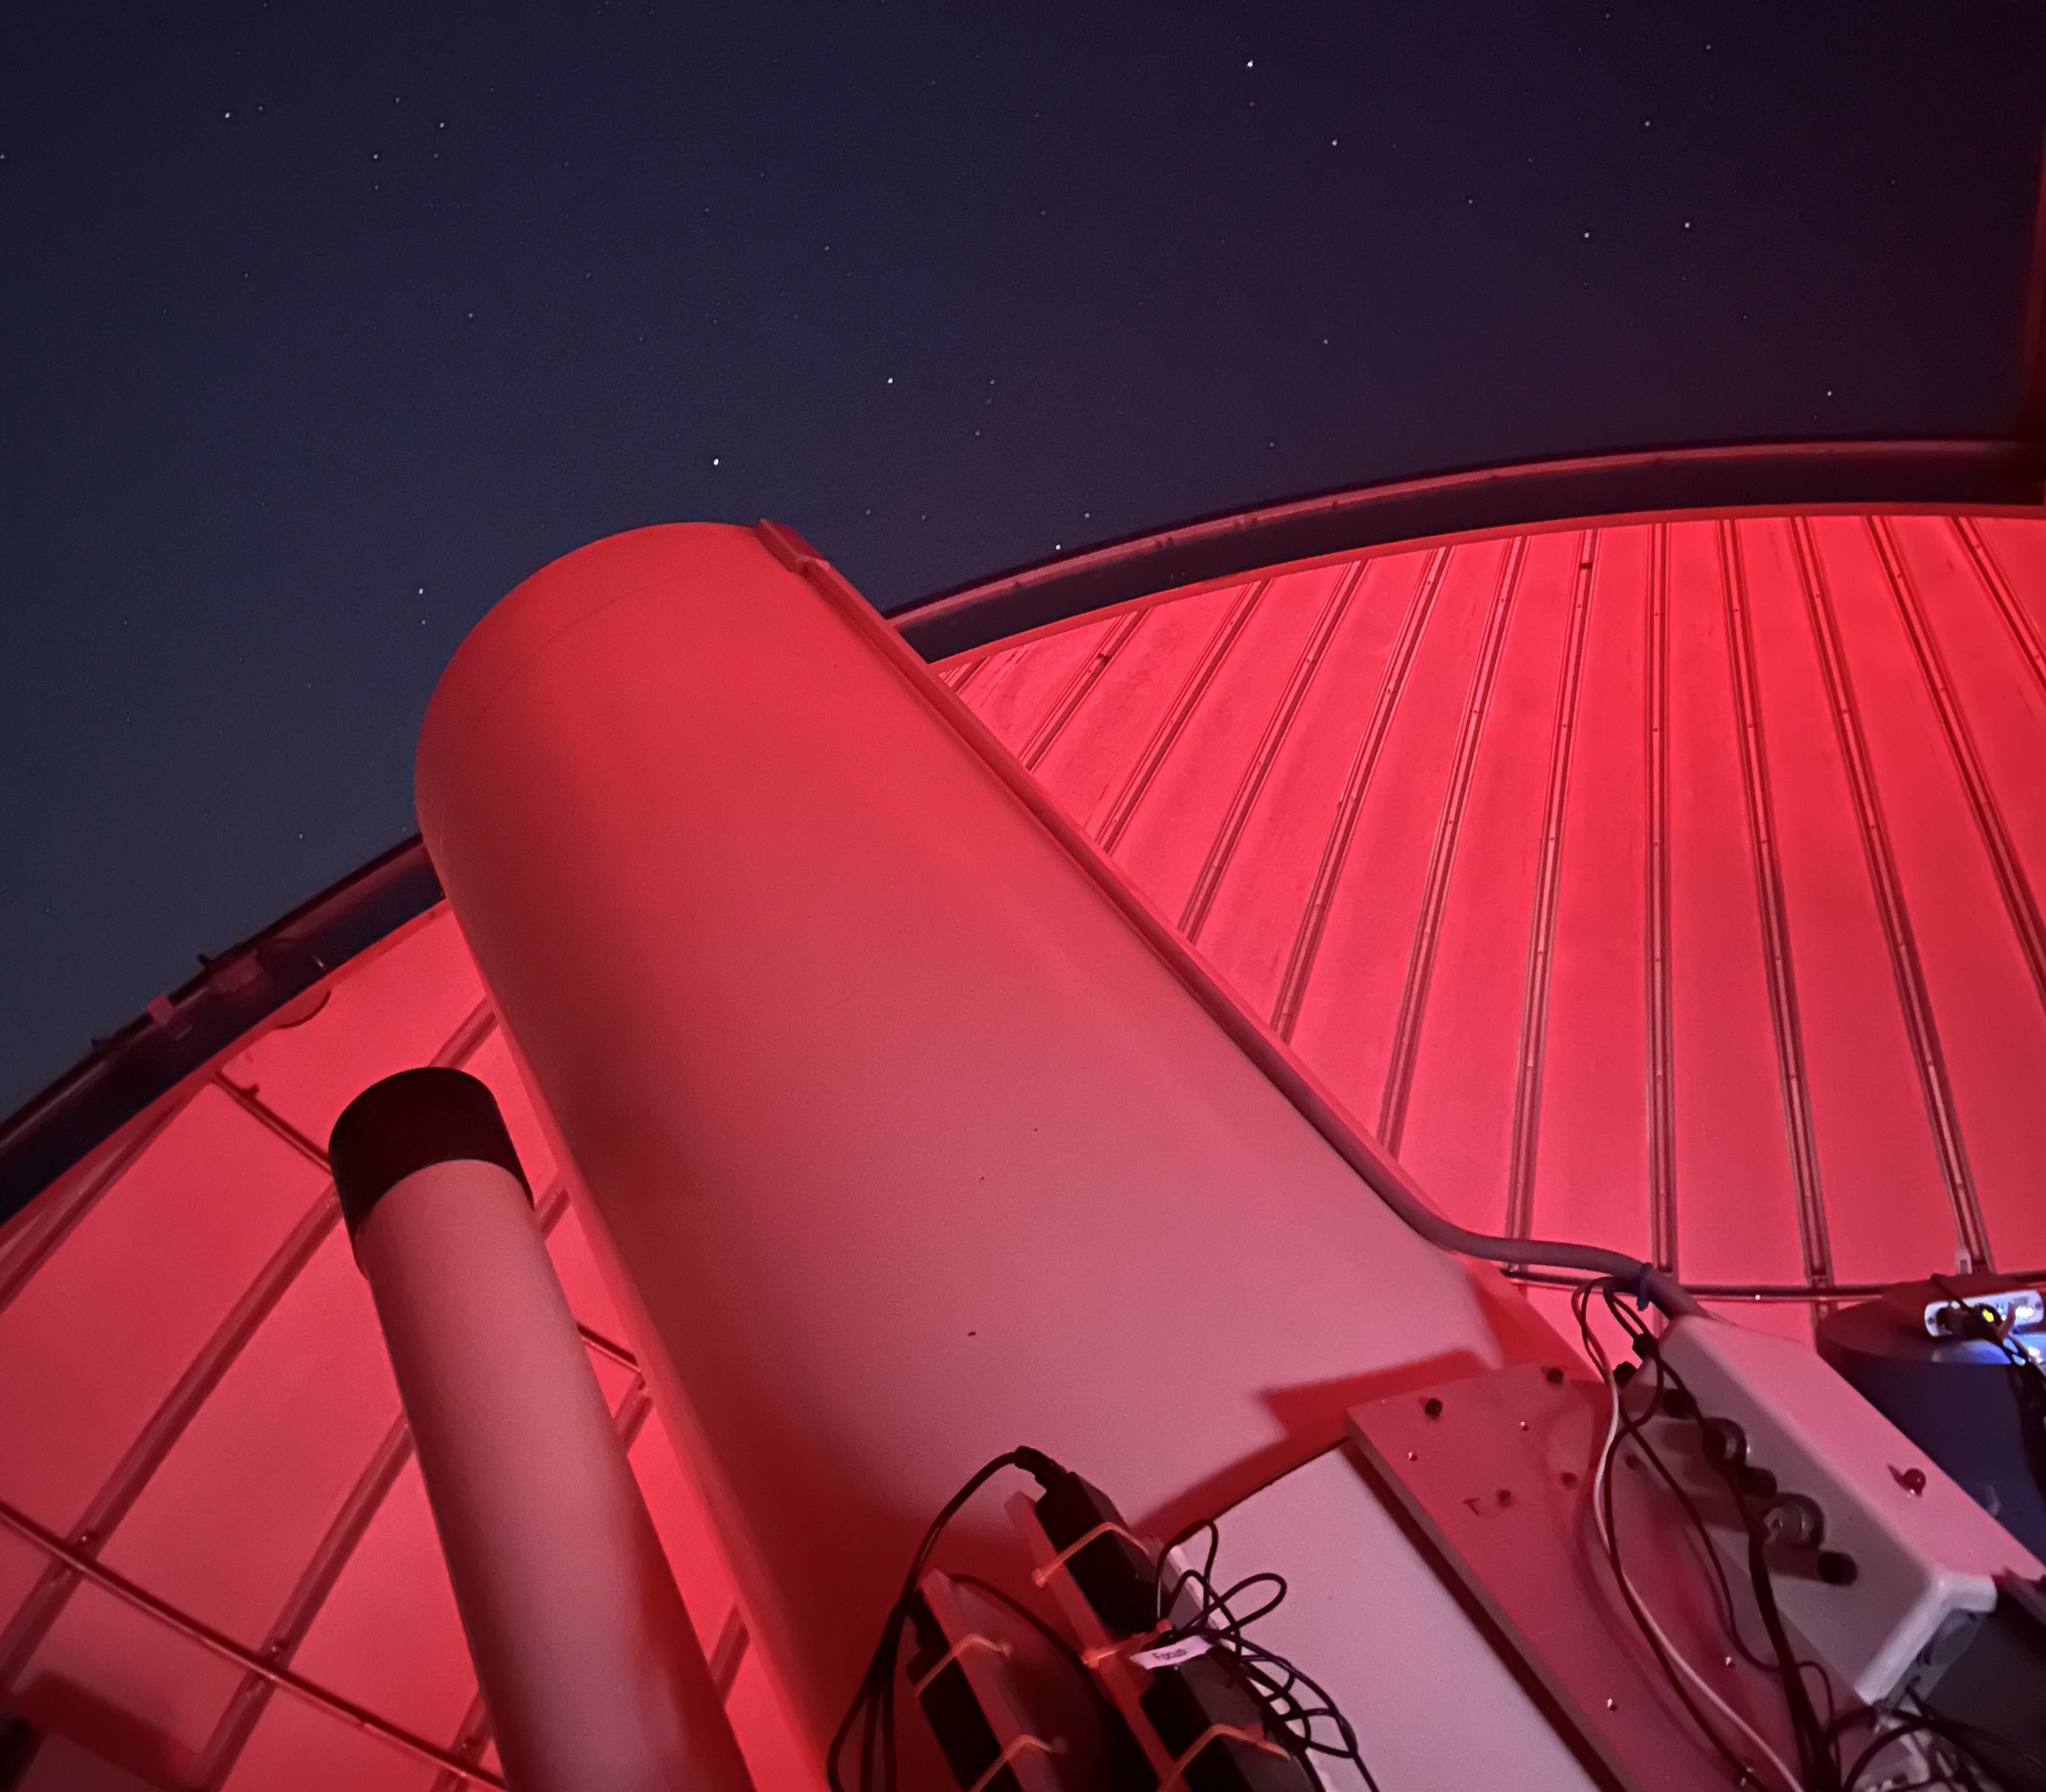 The 24 inch telescope pointing out an open dome.